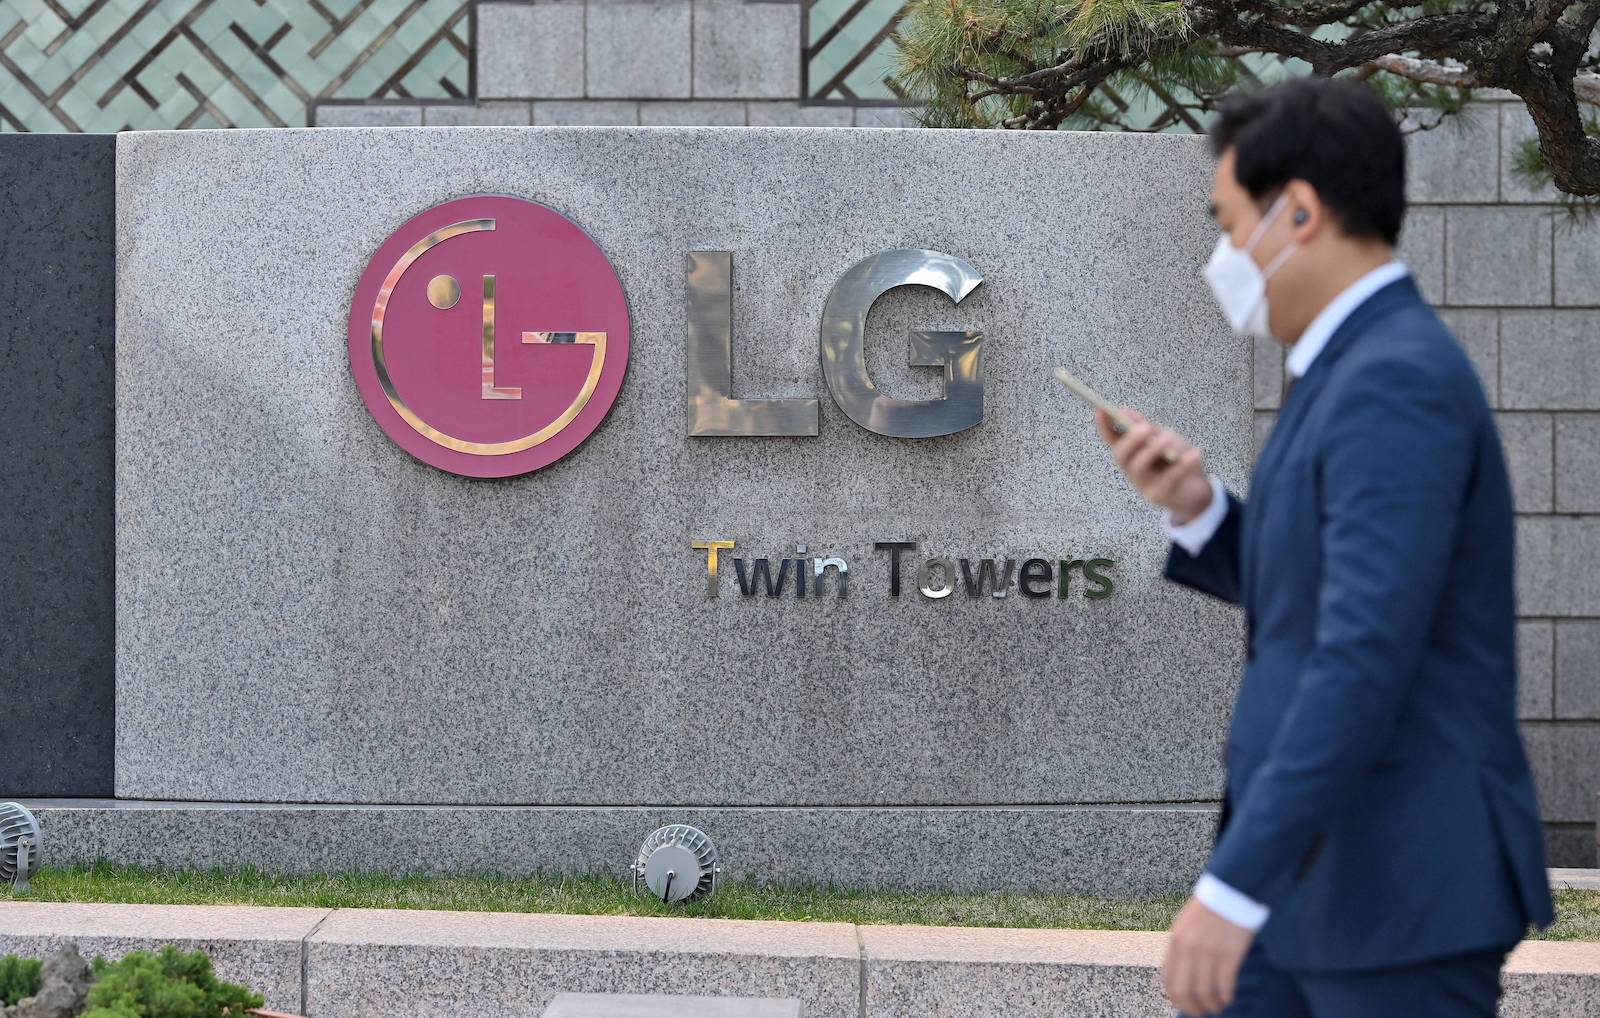 A man walks past the logo of South Korea's LG Electronics in front of the company's headquarters in Seoul on April 5, 2021. (Photo by Jung Yeon-je / AFP) (Photo by JUNG YEON-JE/AFP via Getty Images)